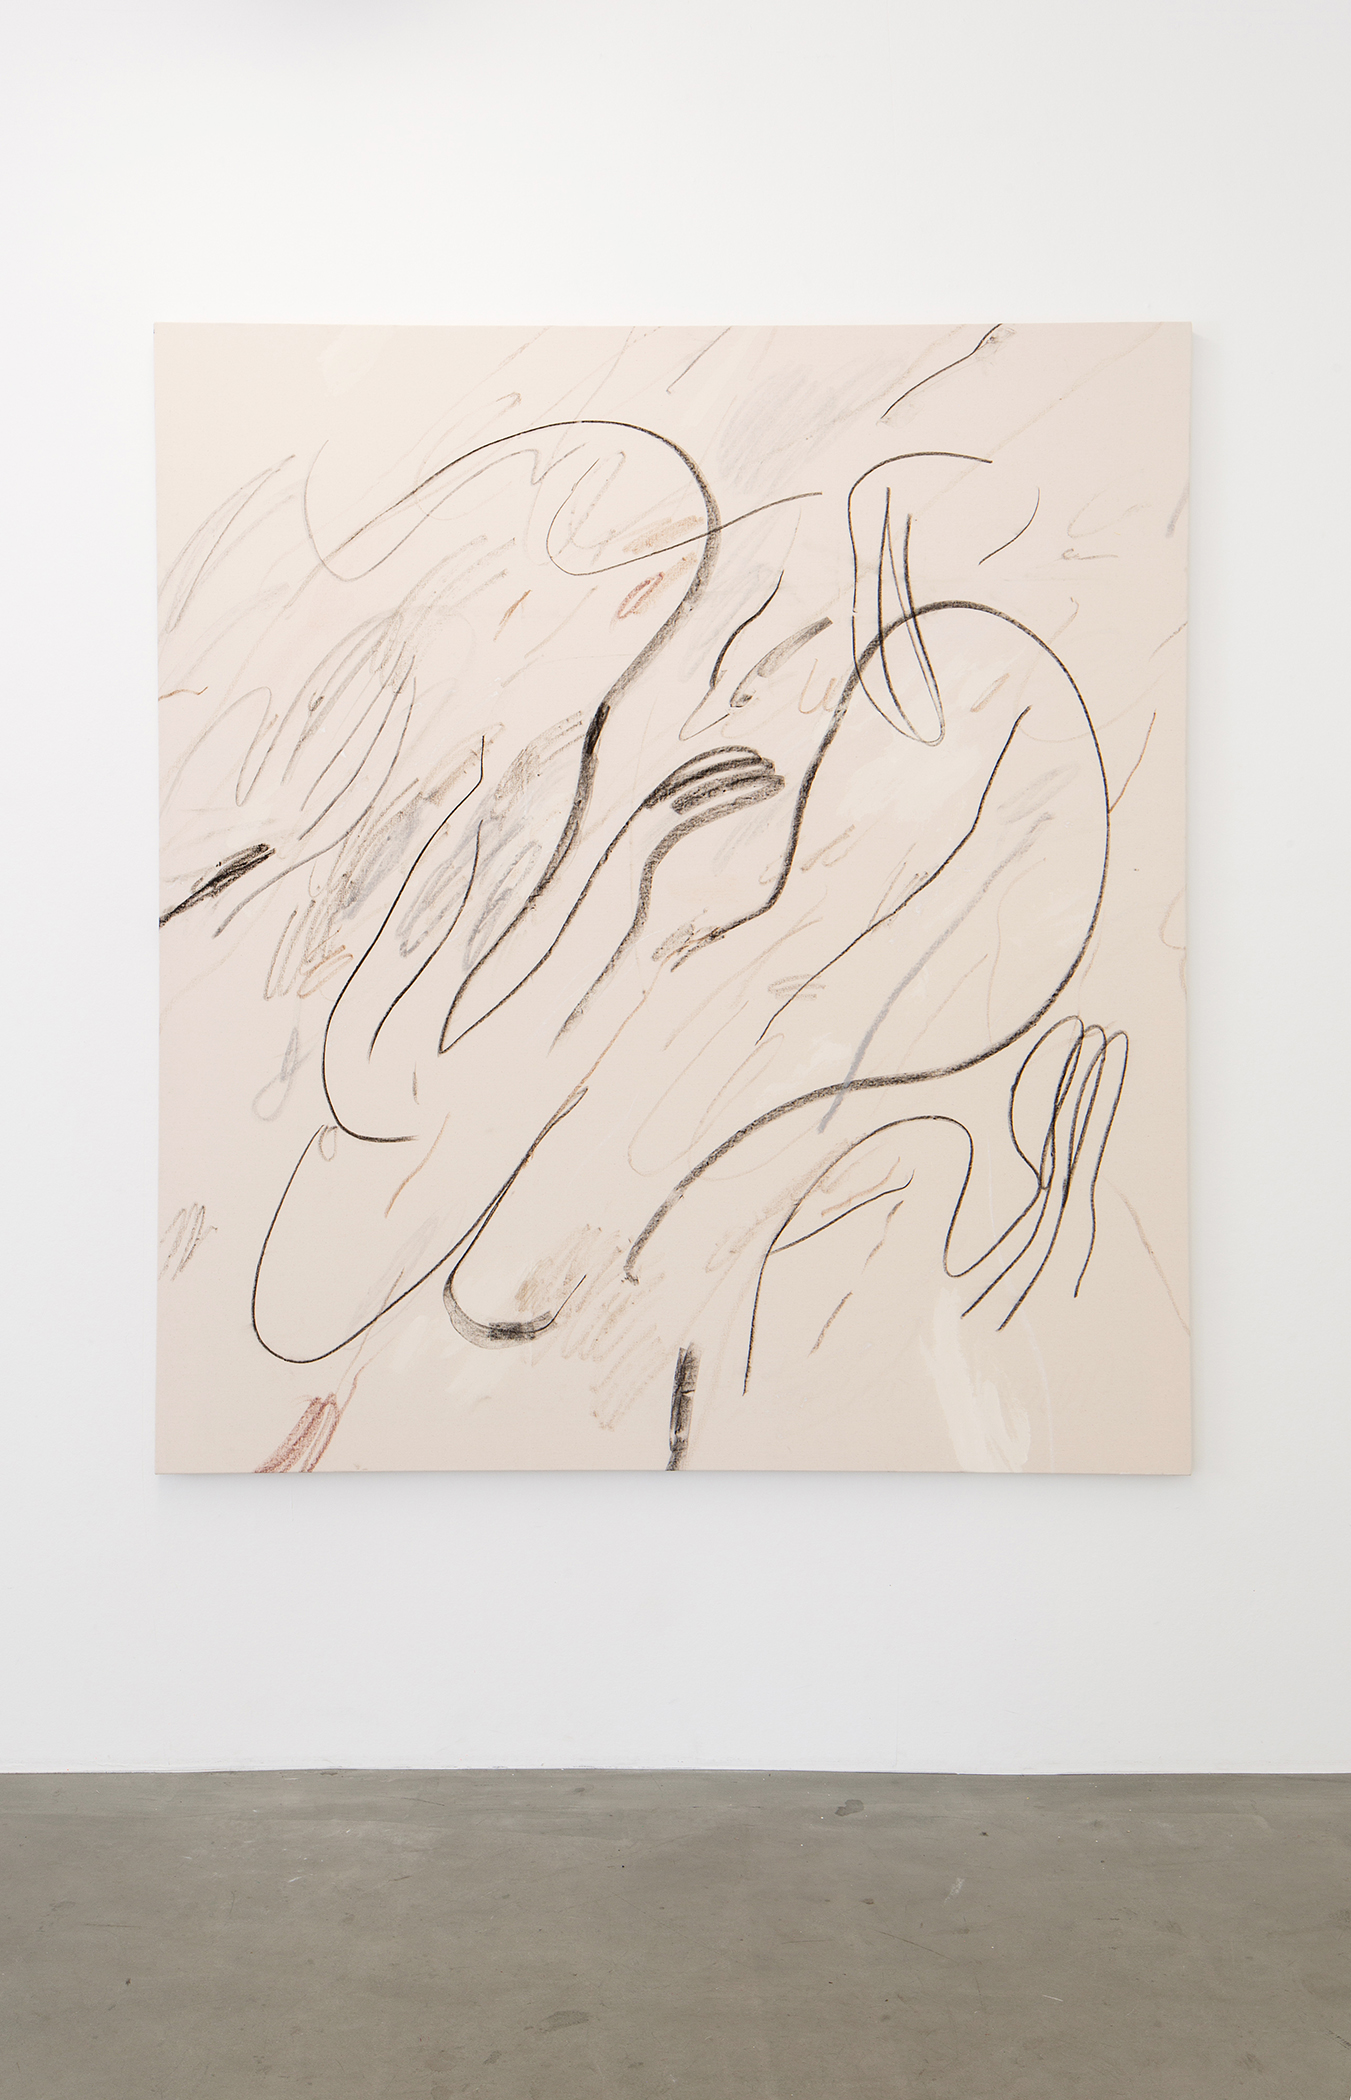  Alina Vergnano,  A Wave A Current A Name , 2019, Acrylic, oil stick and pastels on cotton, 130 x 140 cm 